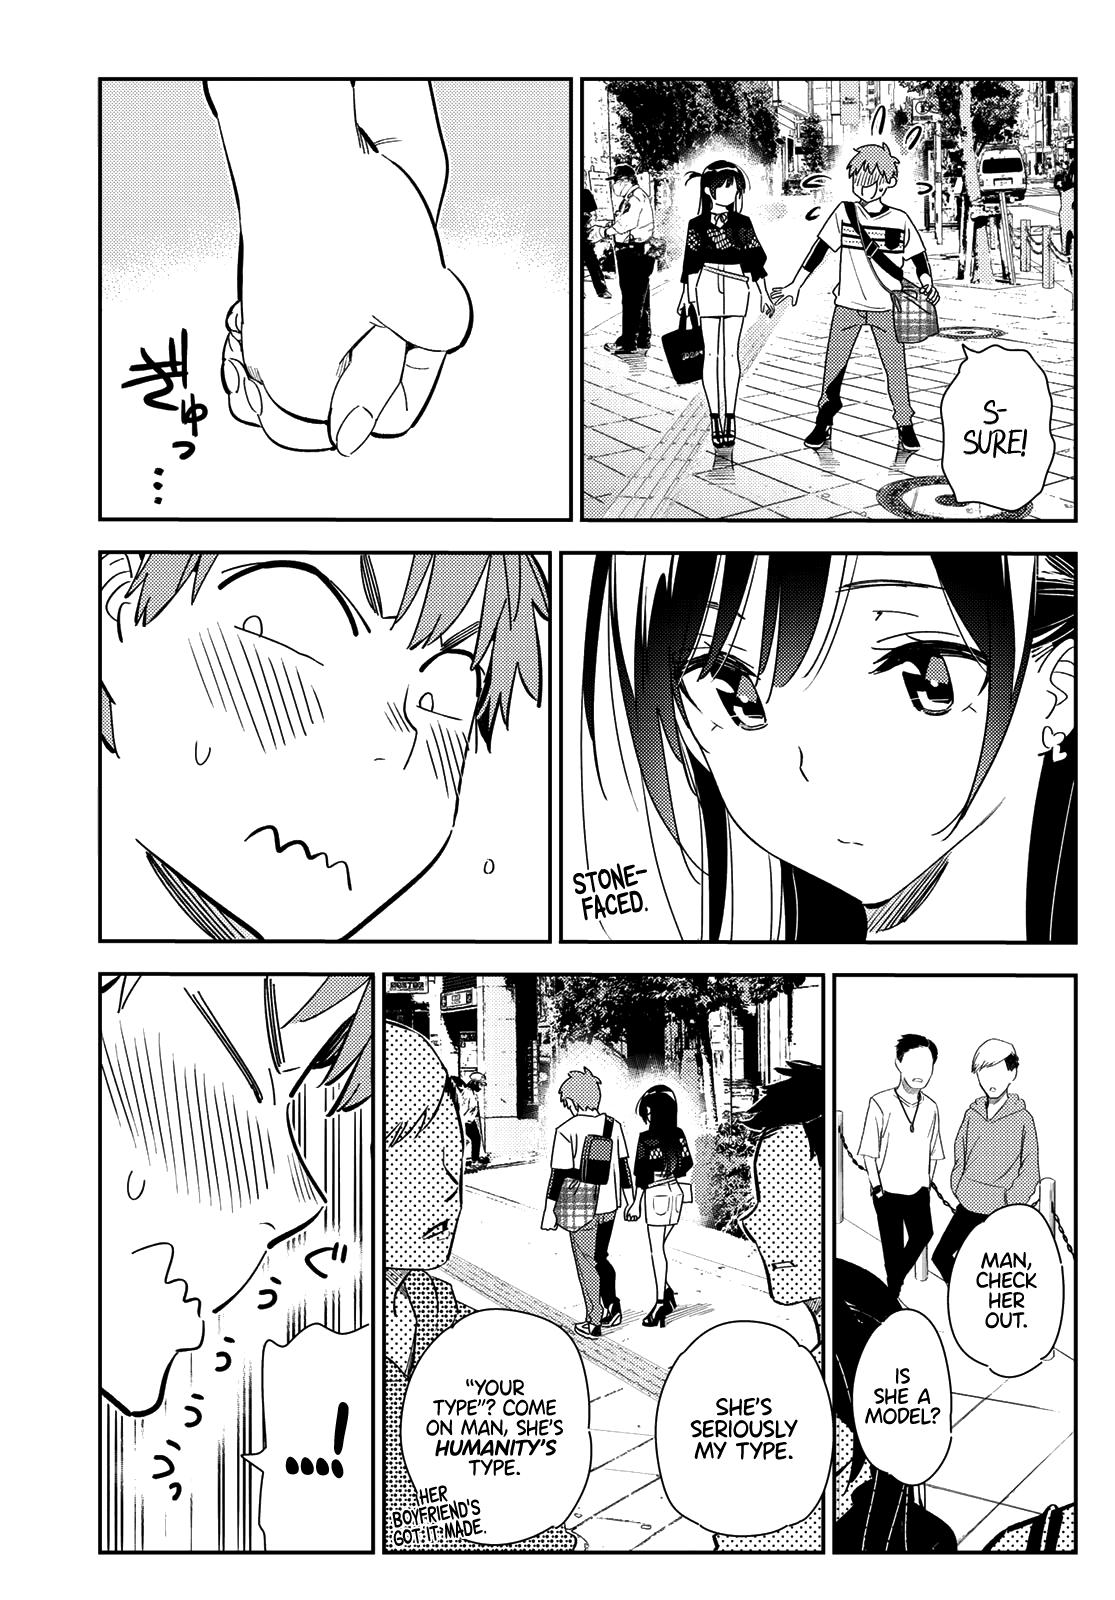 Rent A GirlFriend, Chapter 159 image 004